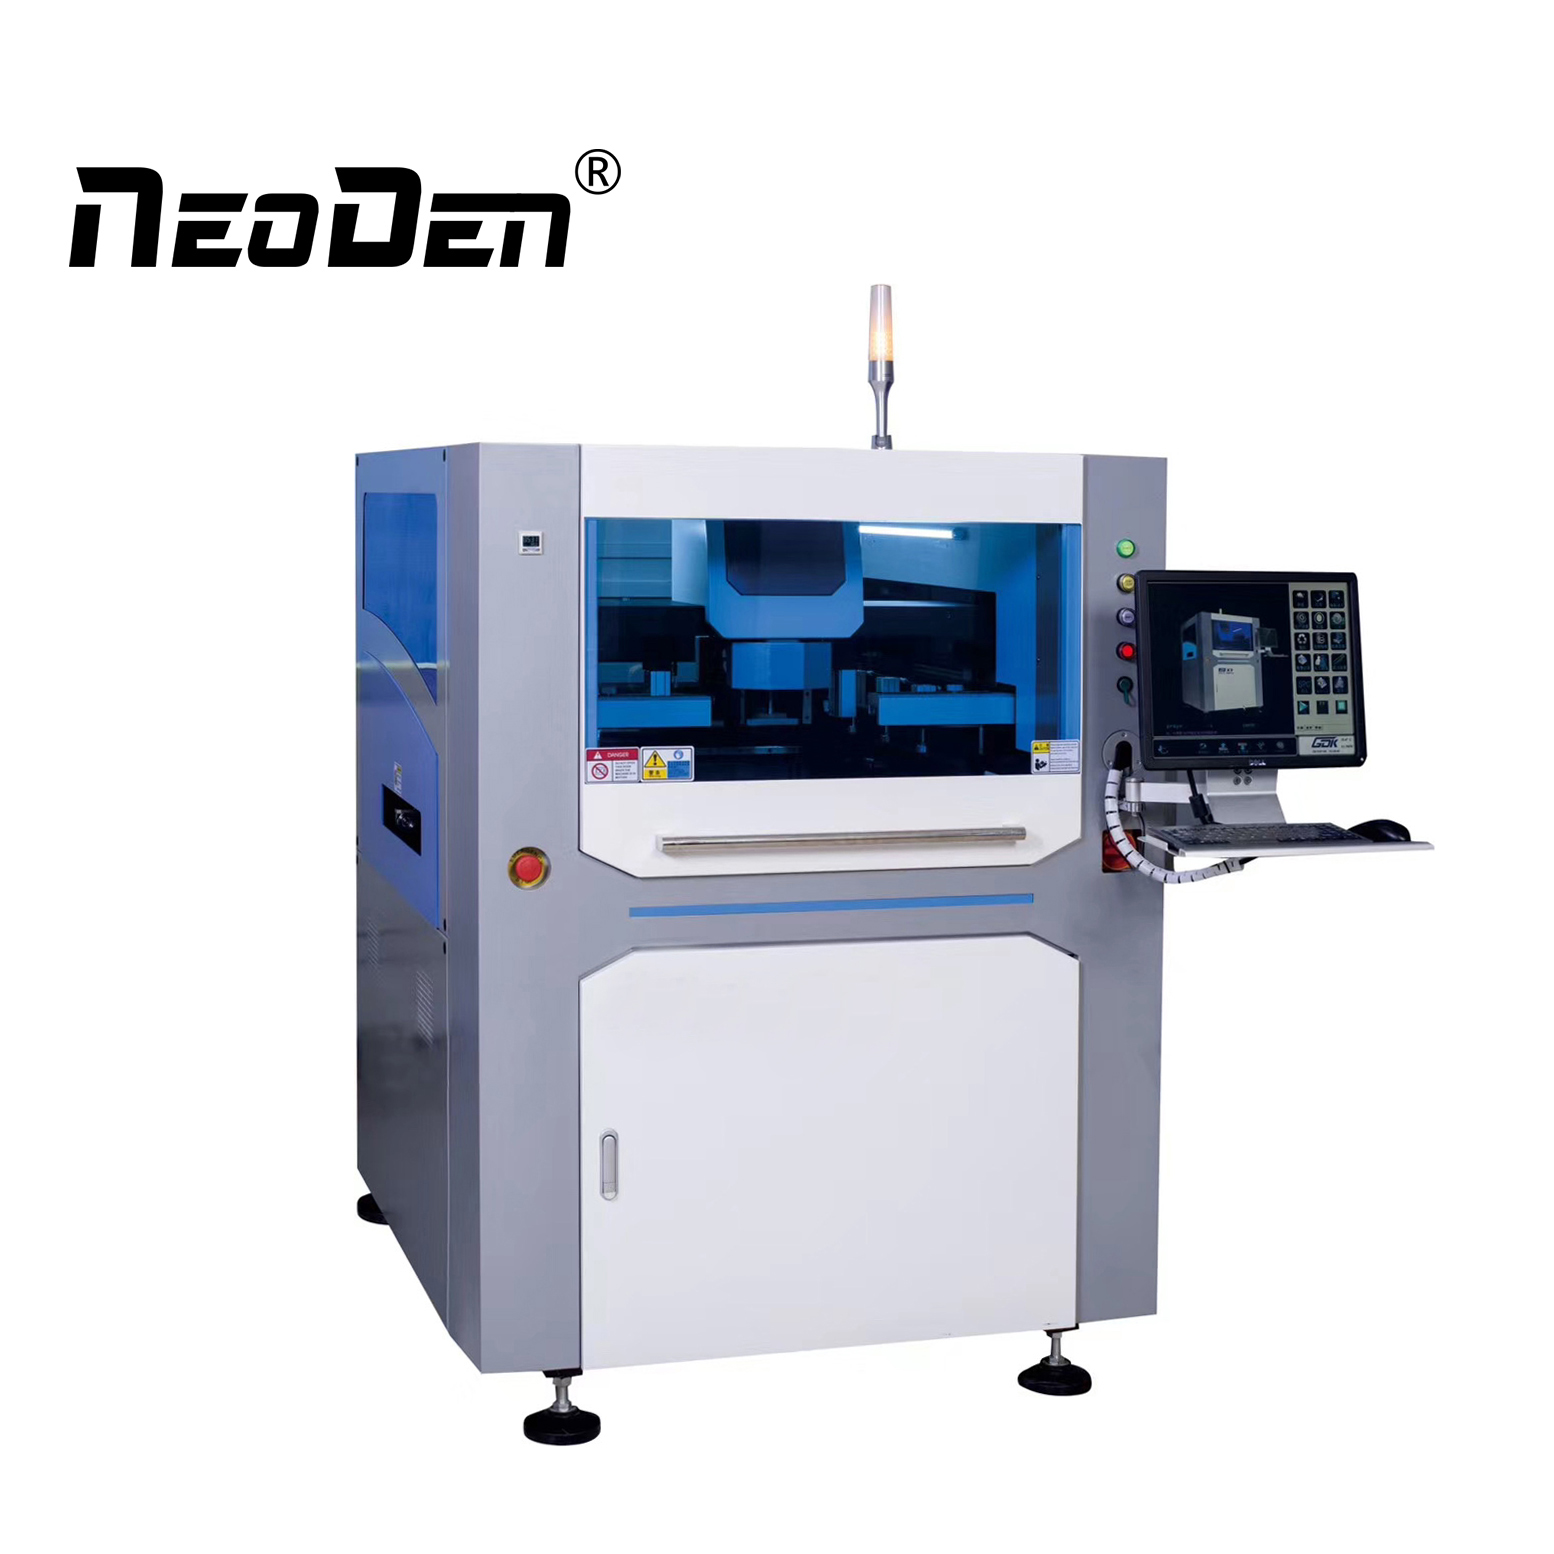 Three classifications of solder paste printing machines